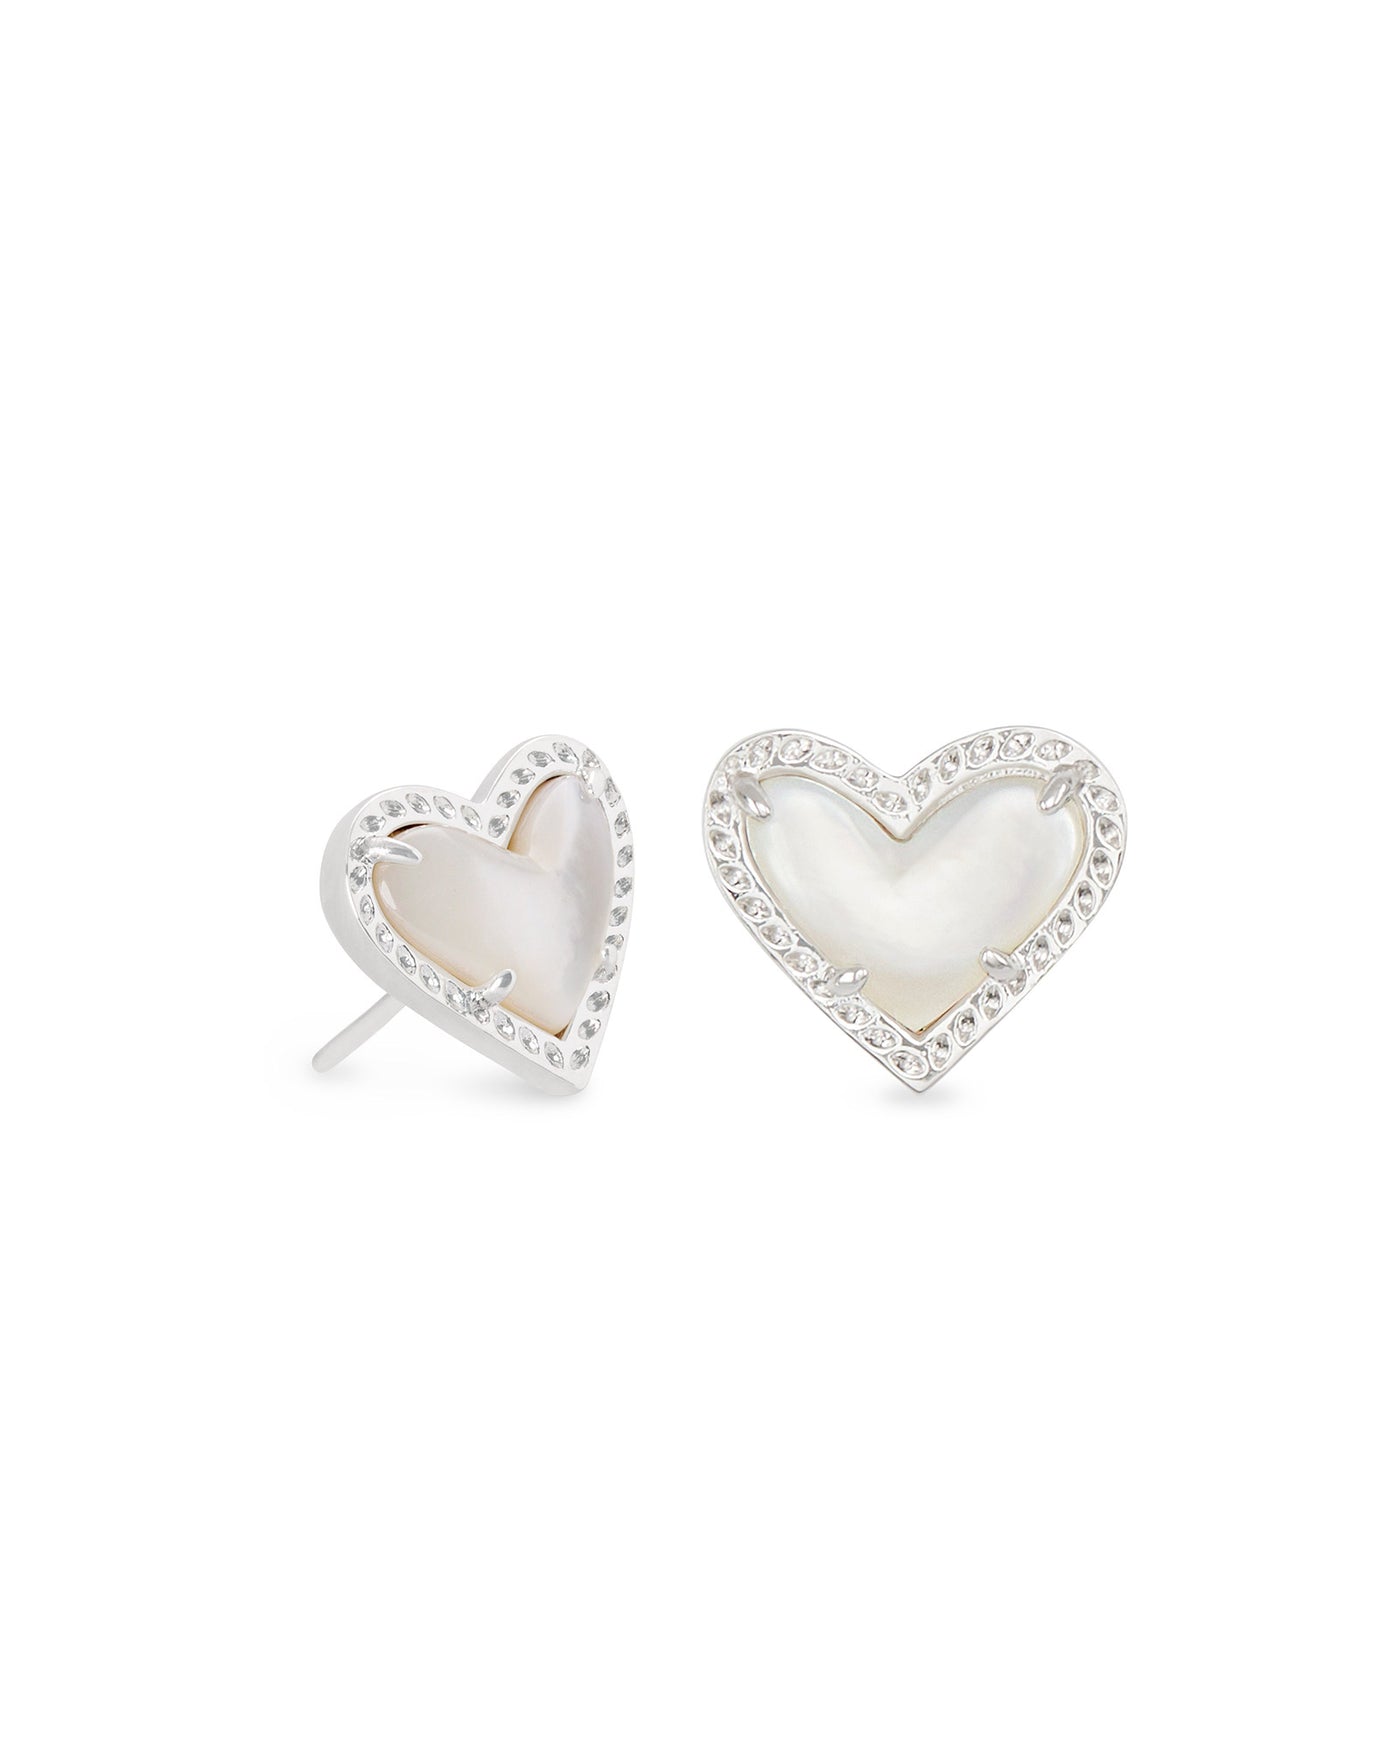 Kendra Scott Ari Heart Stud Earrings Silver Ivory Mother-Of-Pearl-Earrings-Kendra Scott-Market Street Nest, Fashionable Clothing, Shoes and Home Décor Located in Mabank, TX